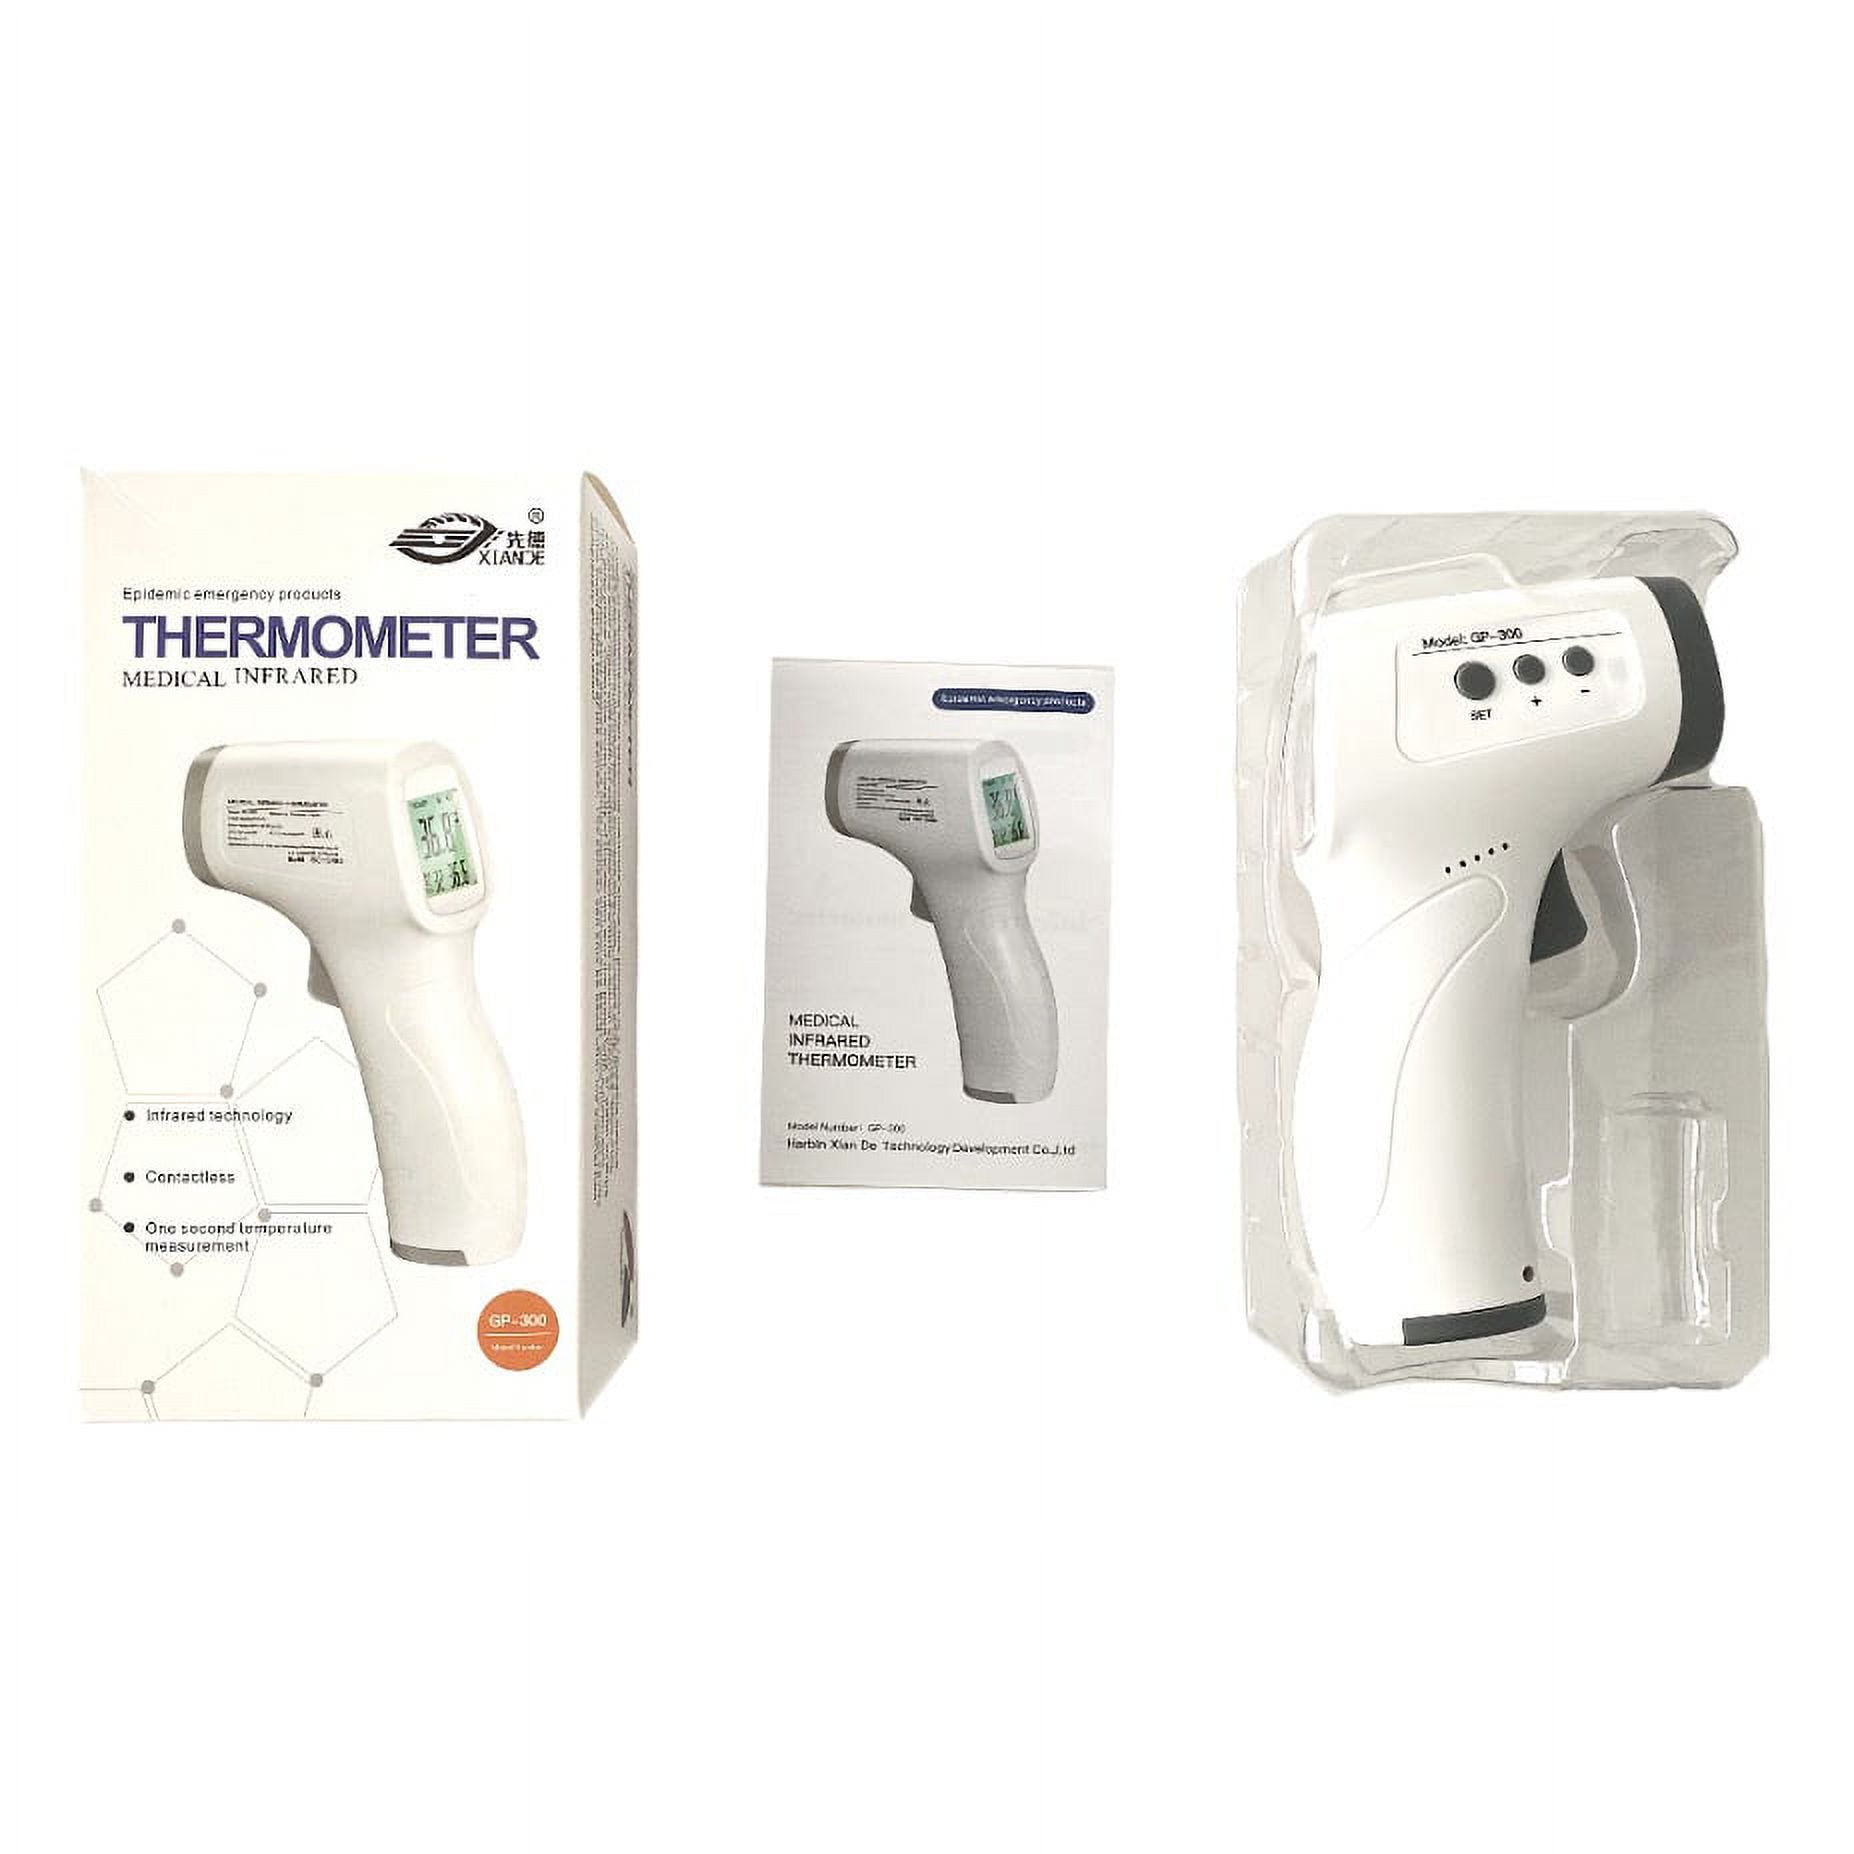 Non-Contact Infrared Thermometer, IR 300